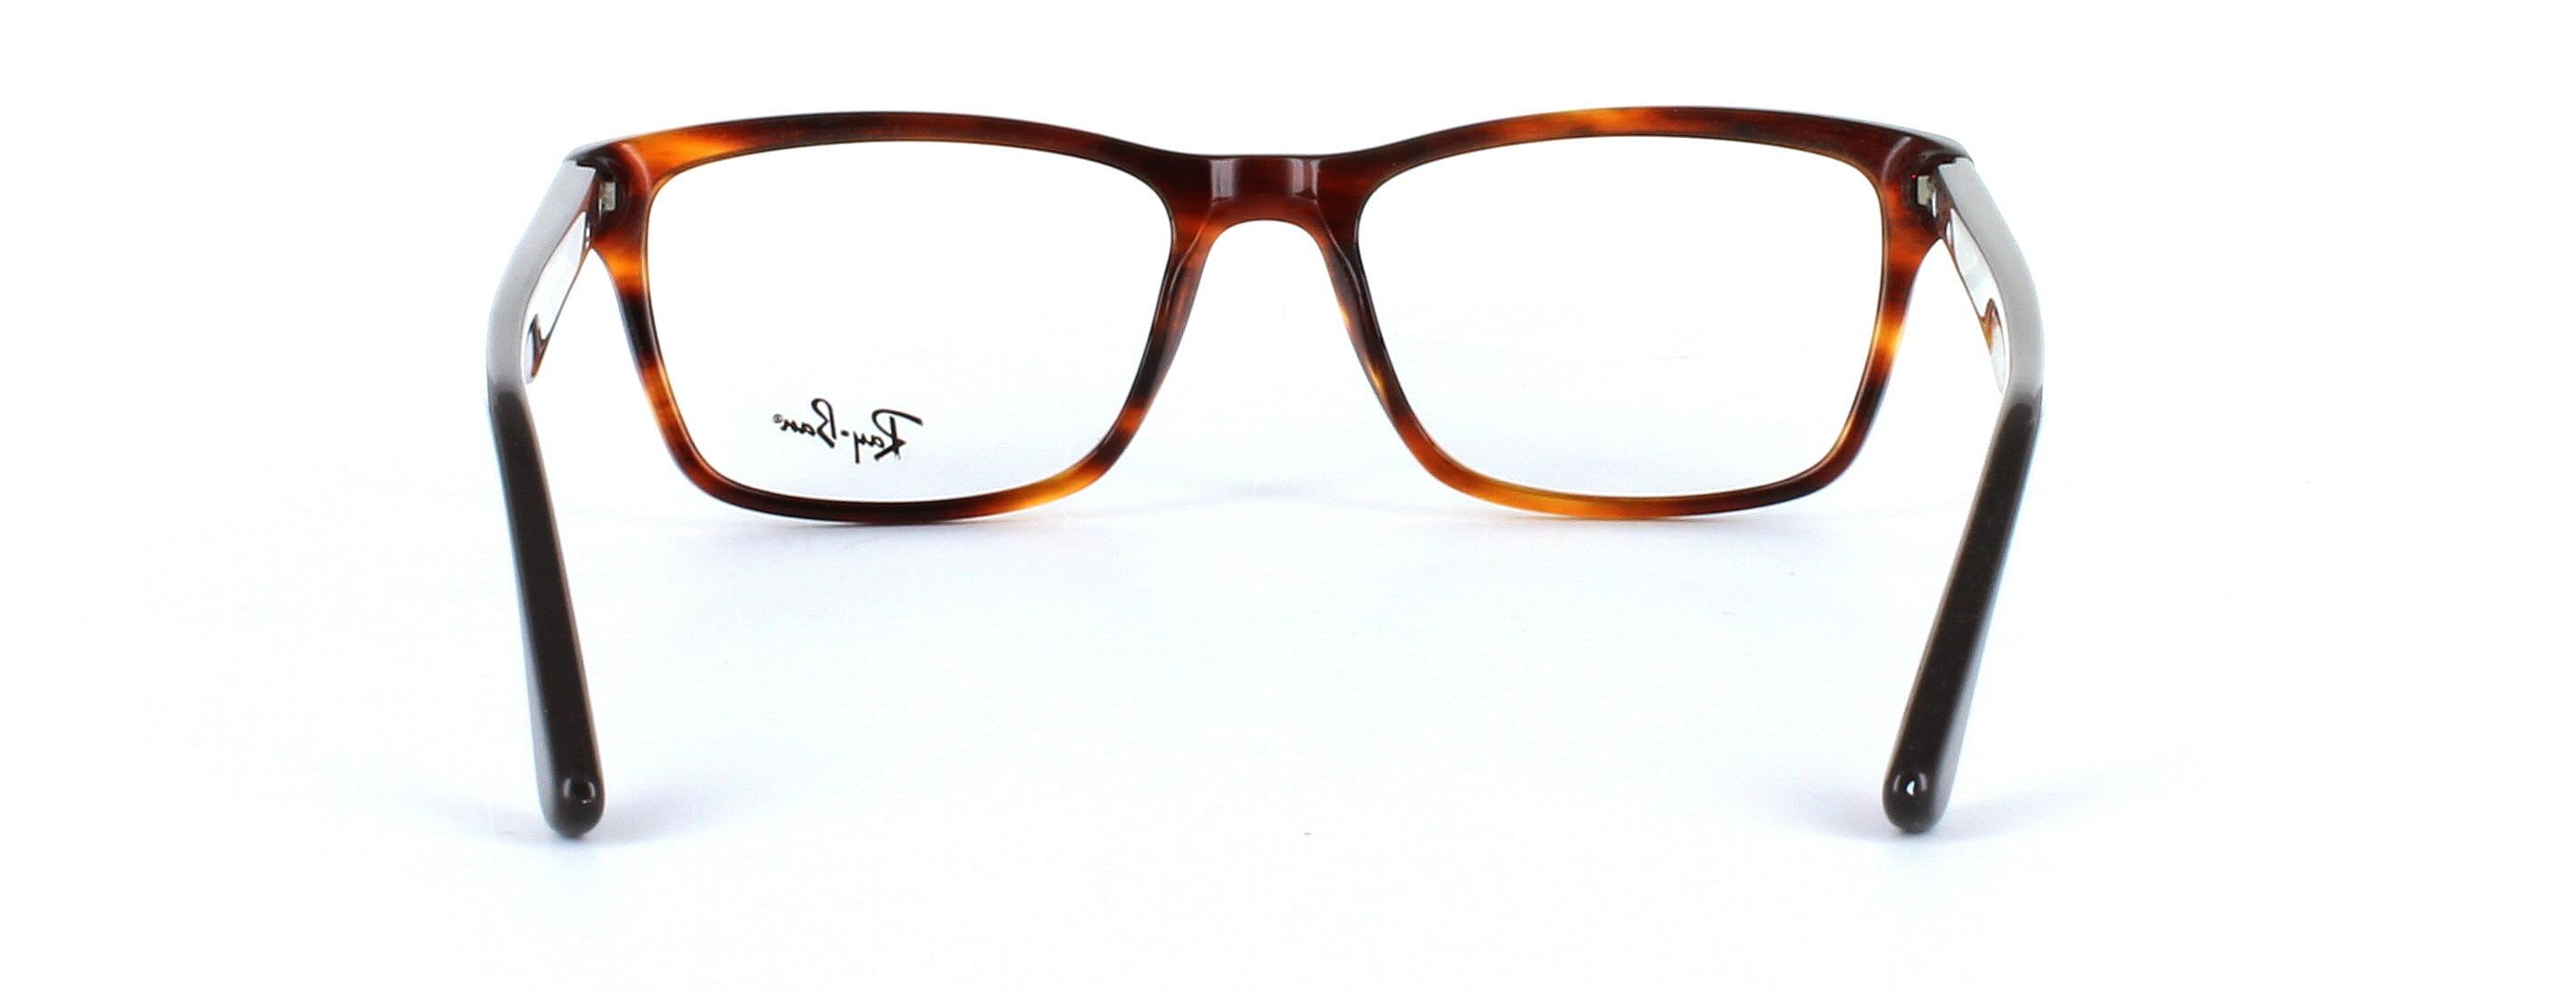 Unisex acetate glasses frame - ray ban 5279 - image view 3